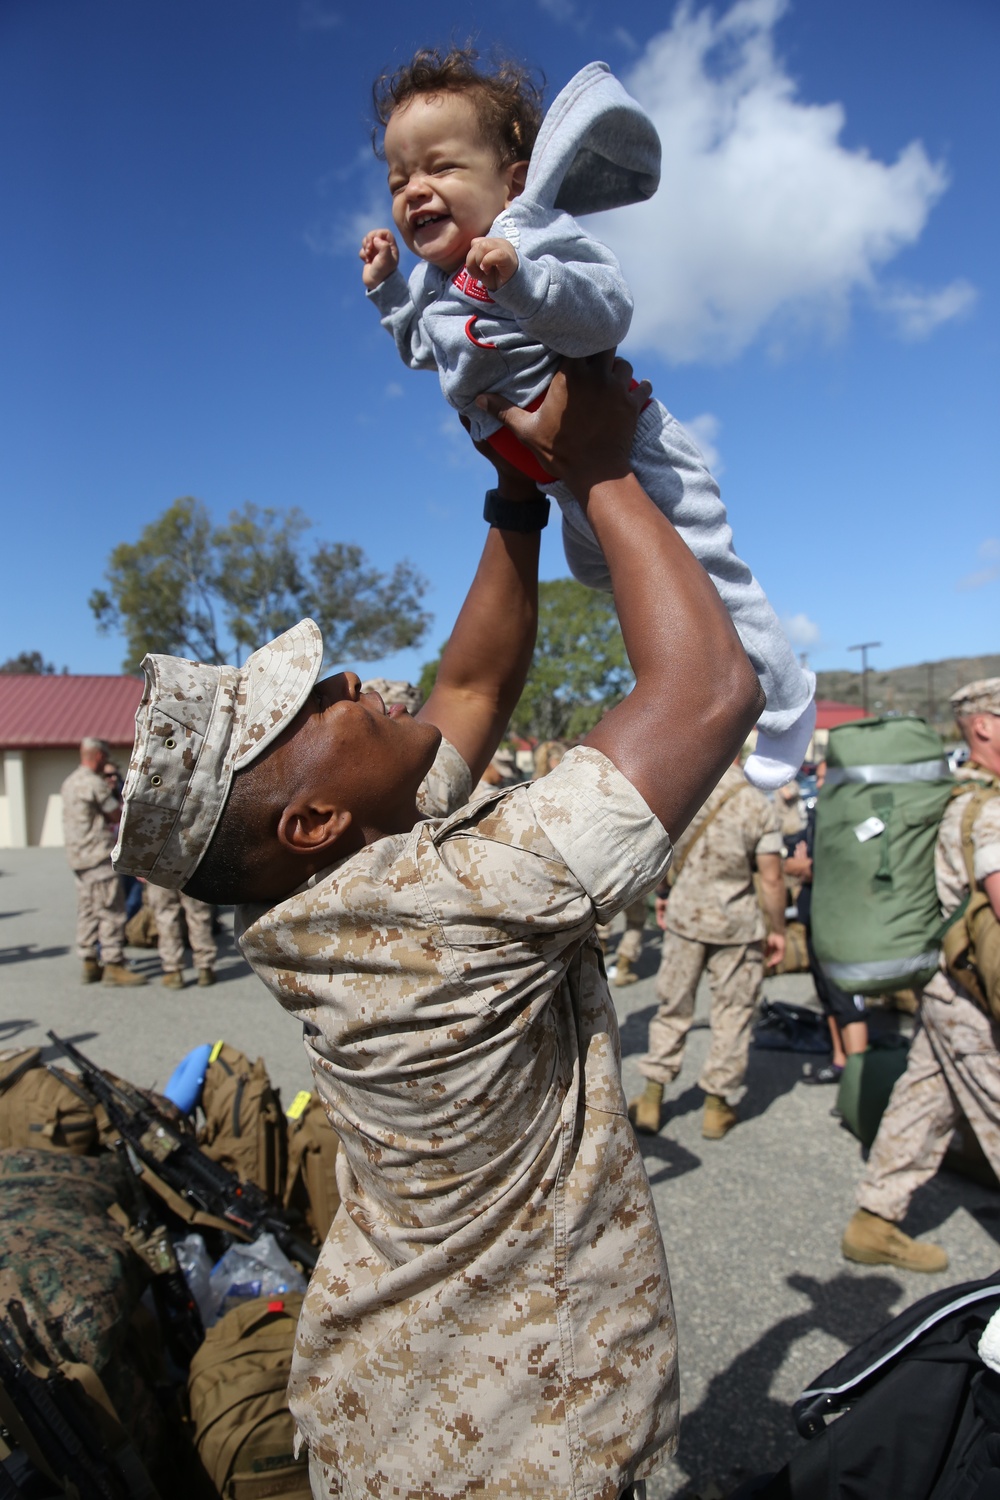 Fighting Fifth Marines bid farewell to families, opens door for new chapter in Pacific